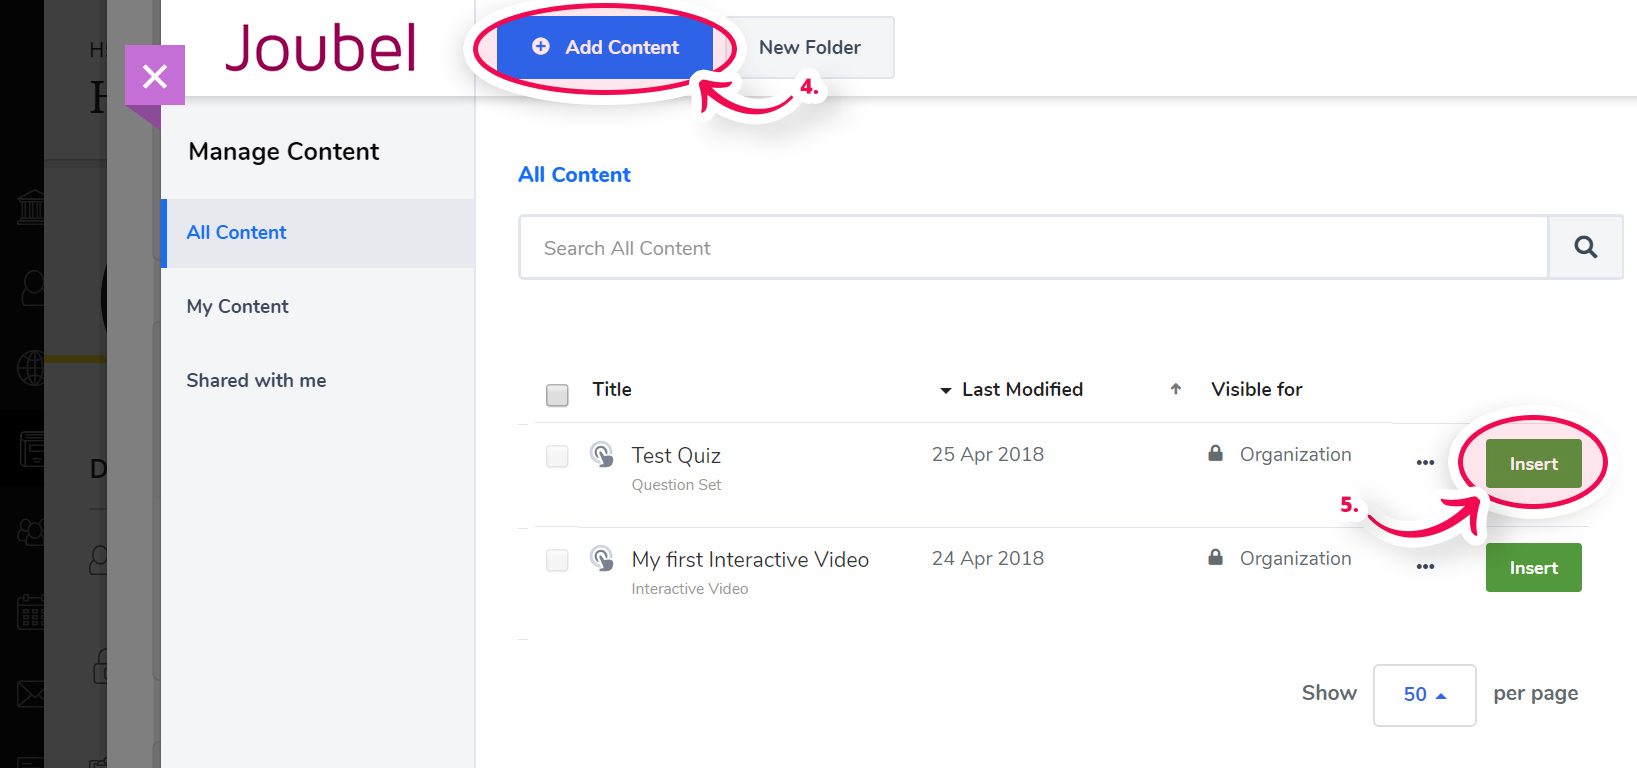 Select Insert to insert content into the Blackboard course